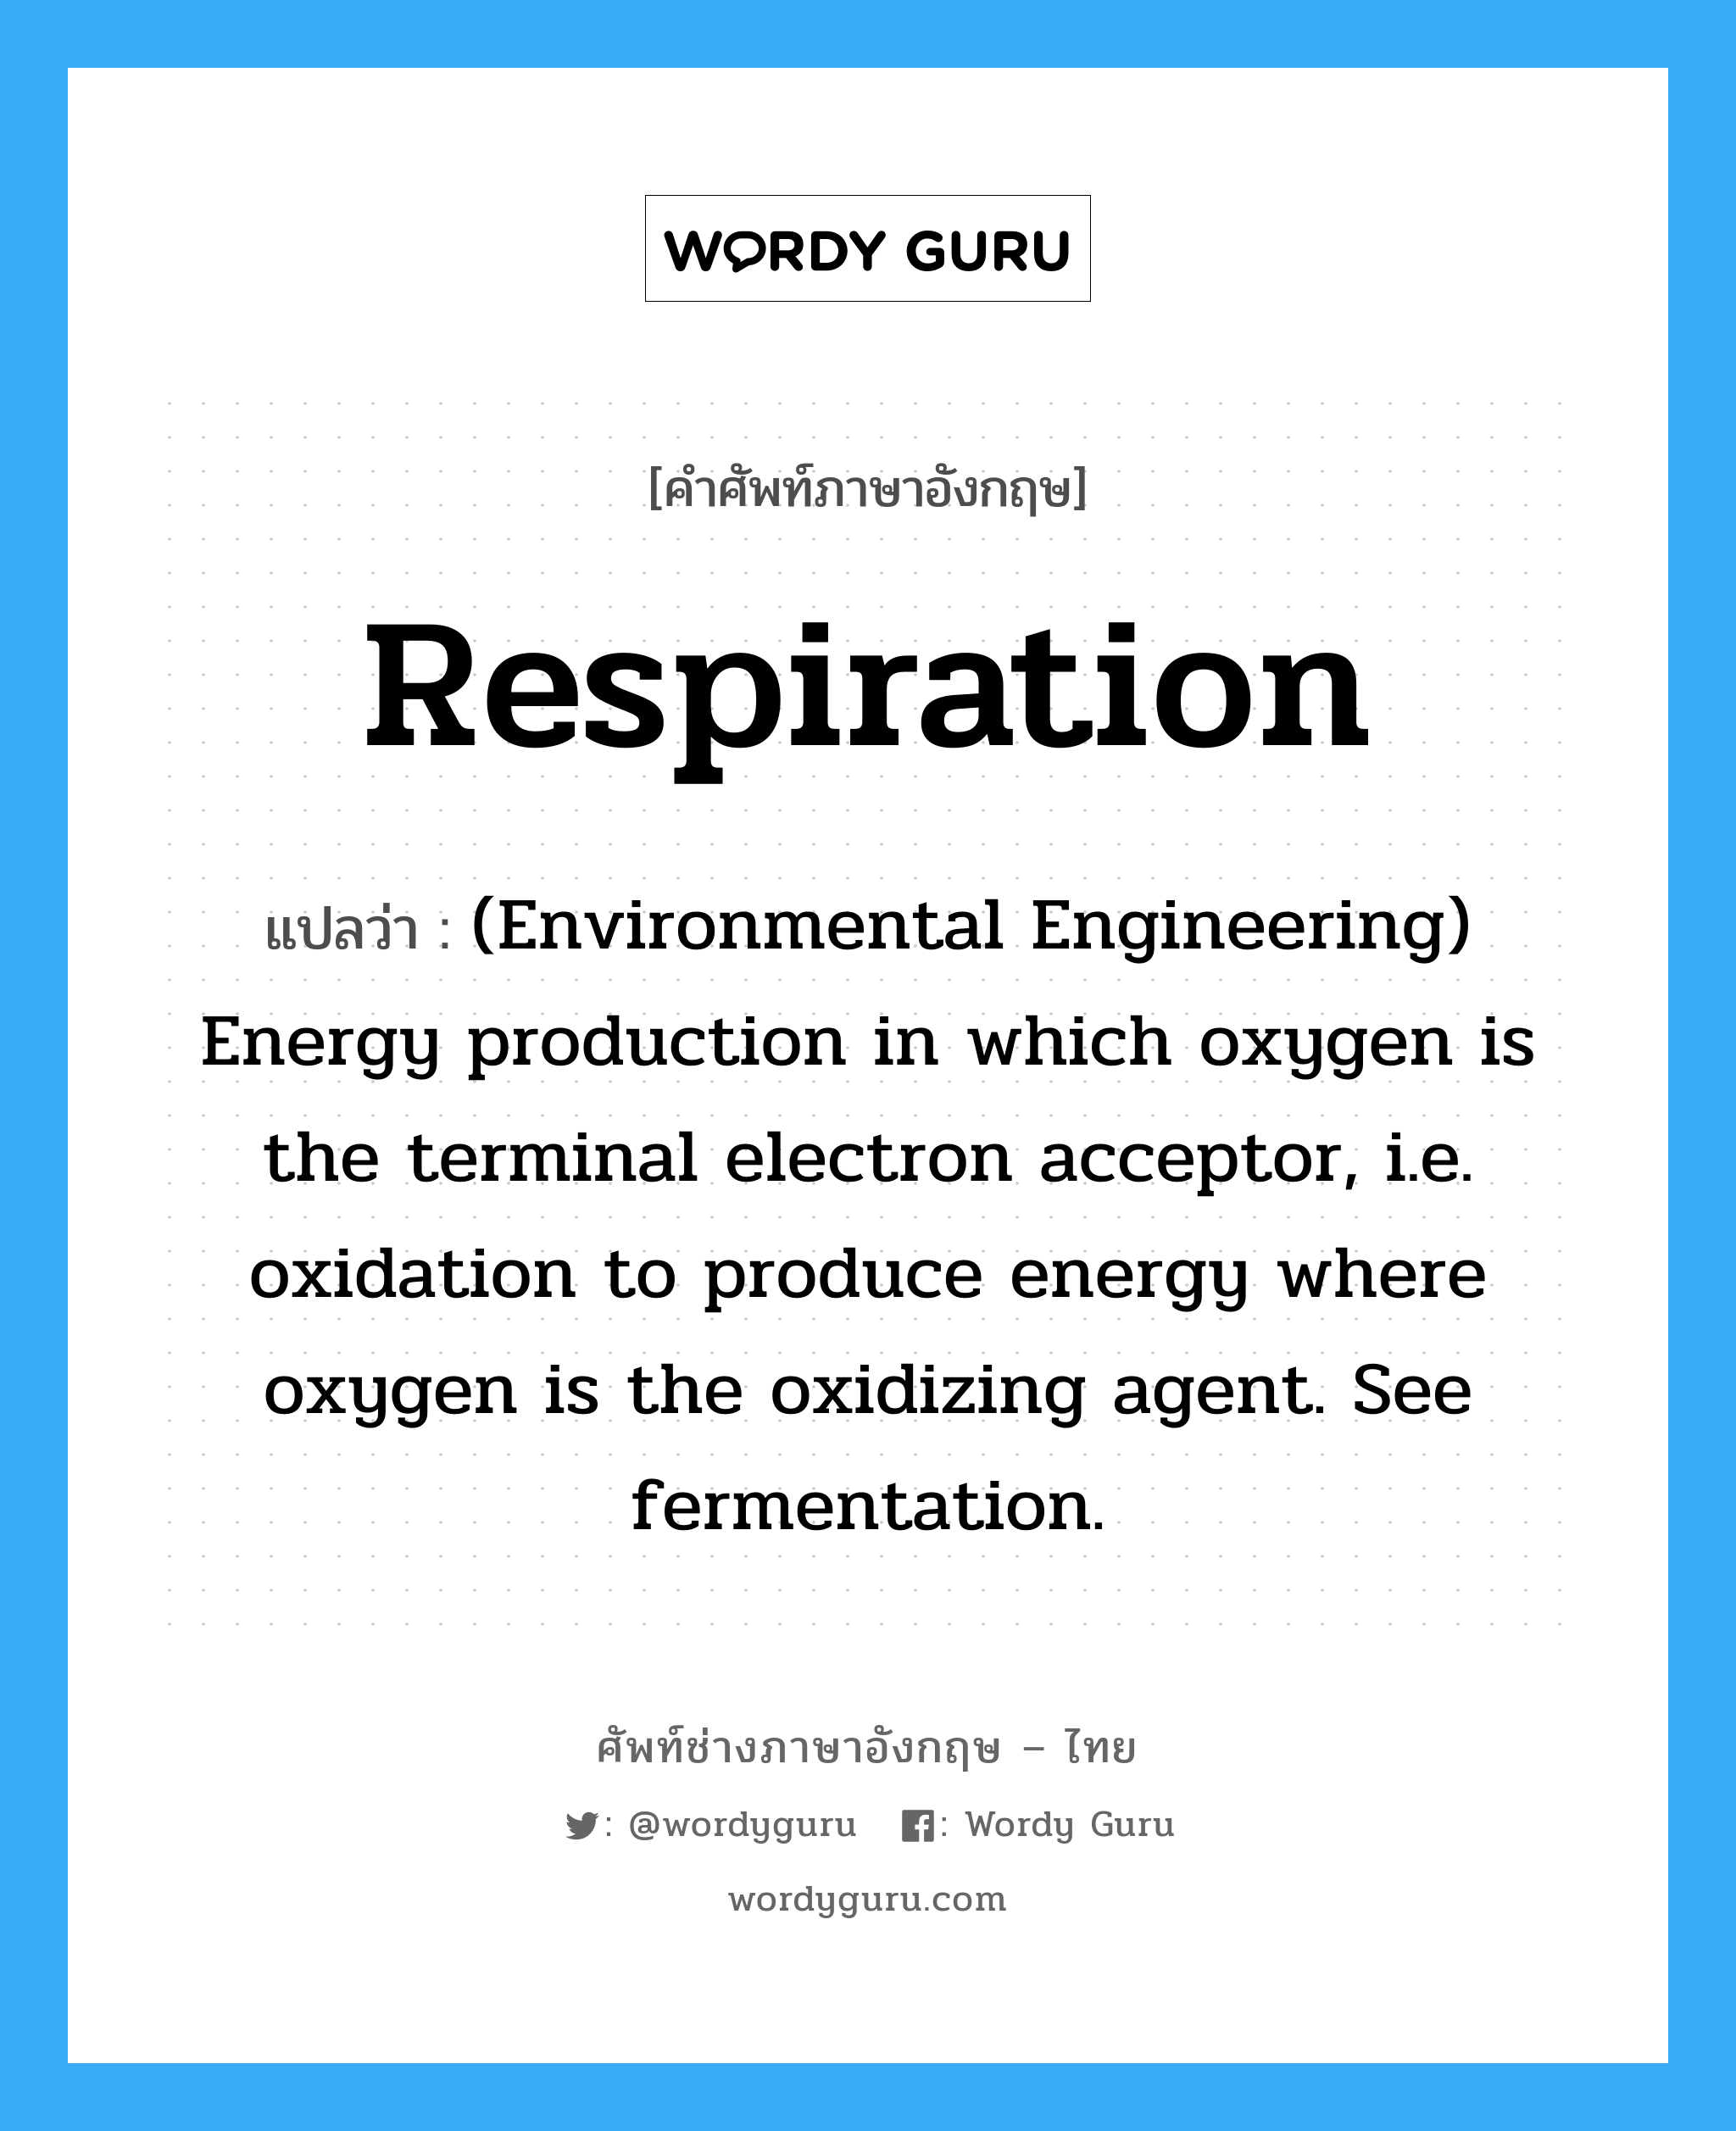 Respiration แปลว่า?, คำศัพท์ช่างภาษาอังกฤษ - ไทย Respiration คำศัพท์ภาษาอังกฤษ Respiration แปลว่า (Environmental Engineering) Energy production in which oxygen is the terminal electron acceptor, i.e. oxidation to produce energy where oxygen is the oxidizing agent. See fermentation.